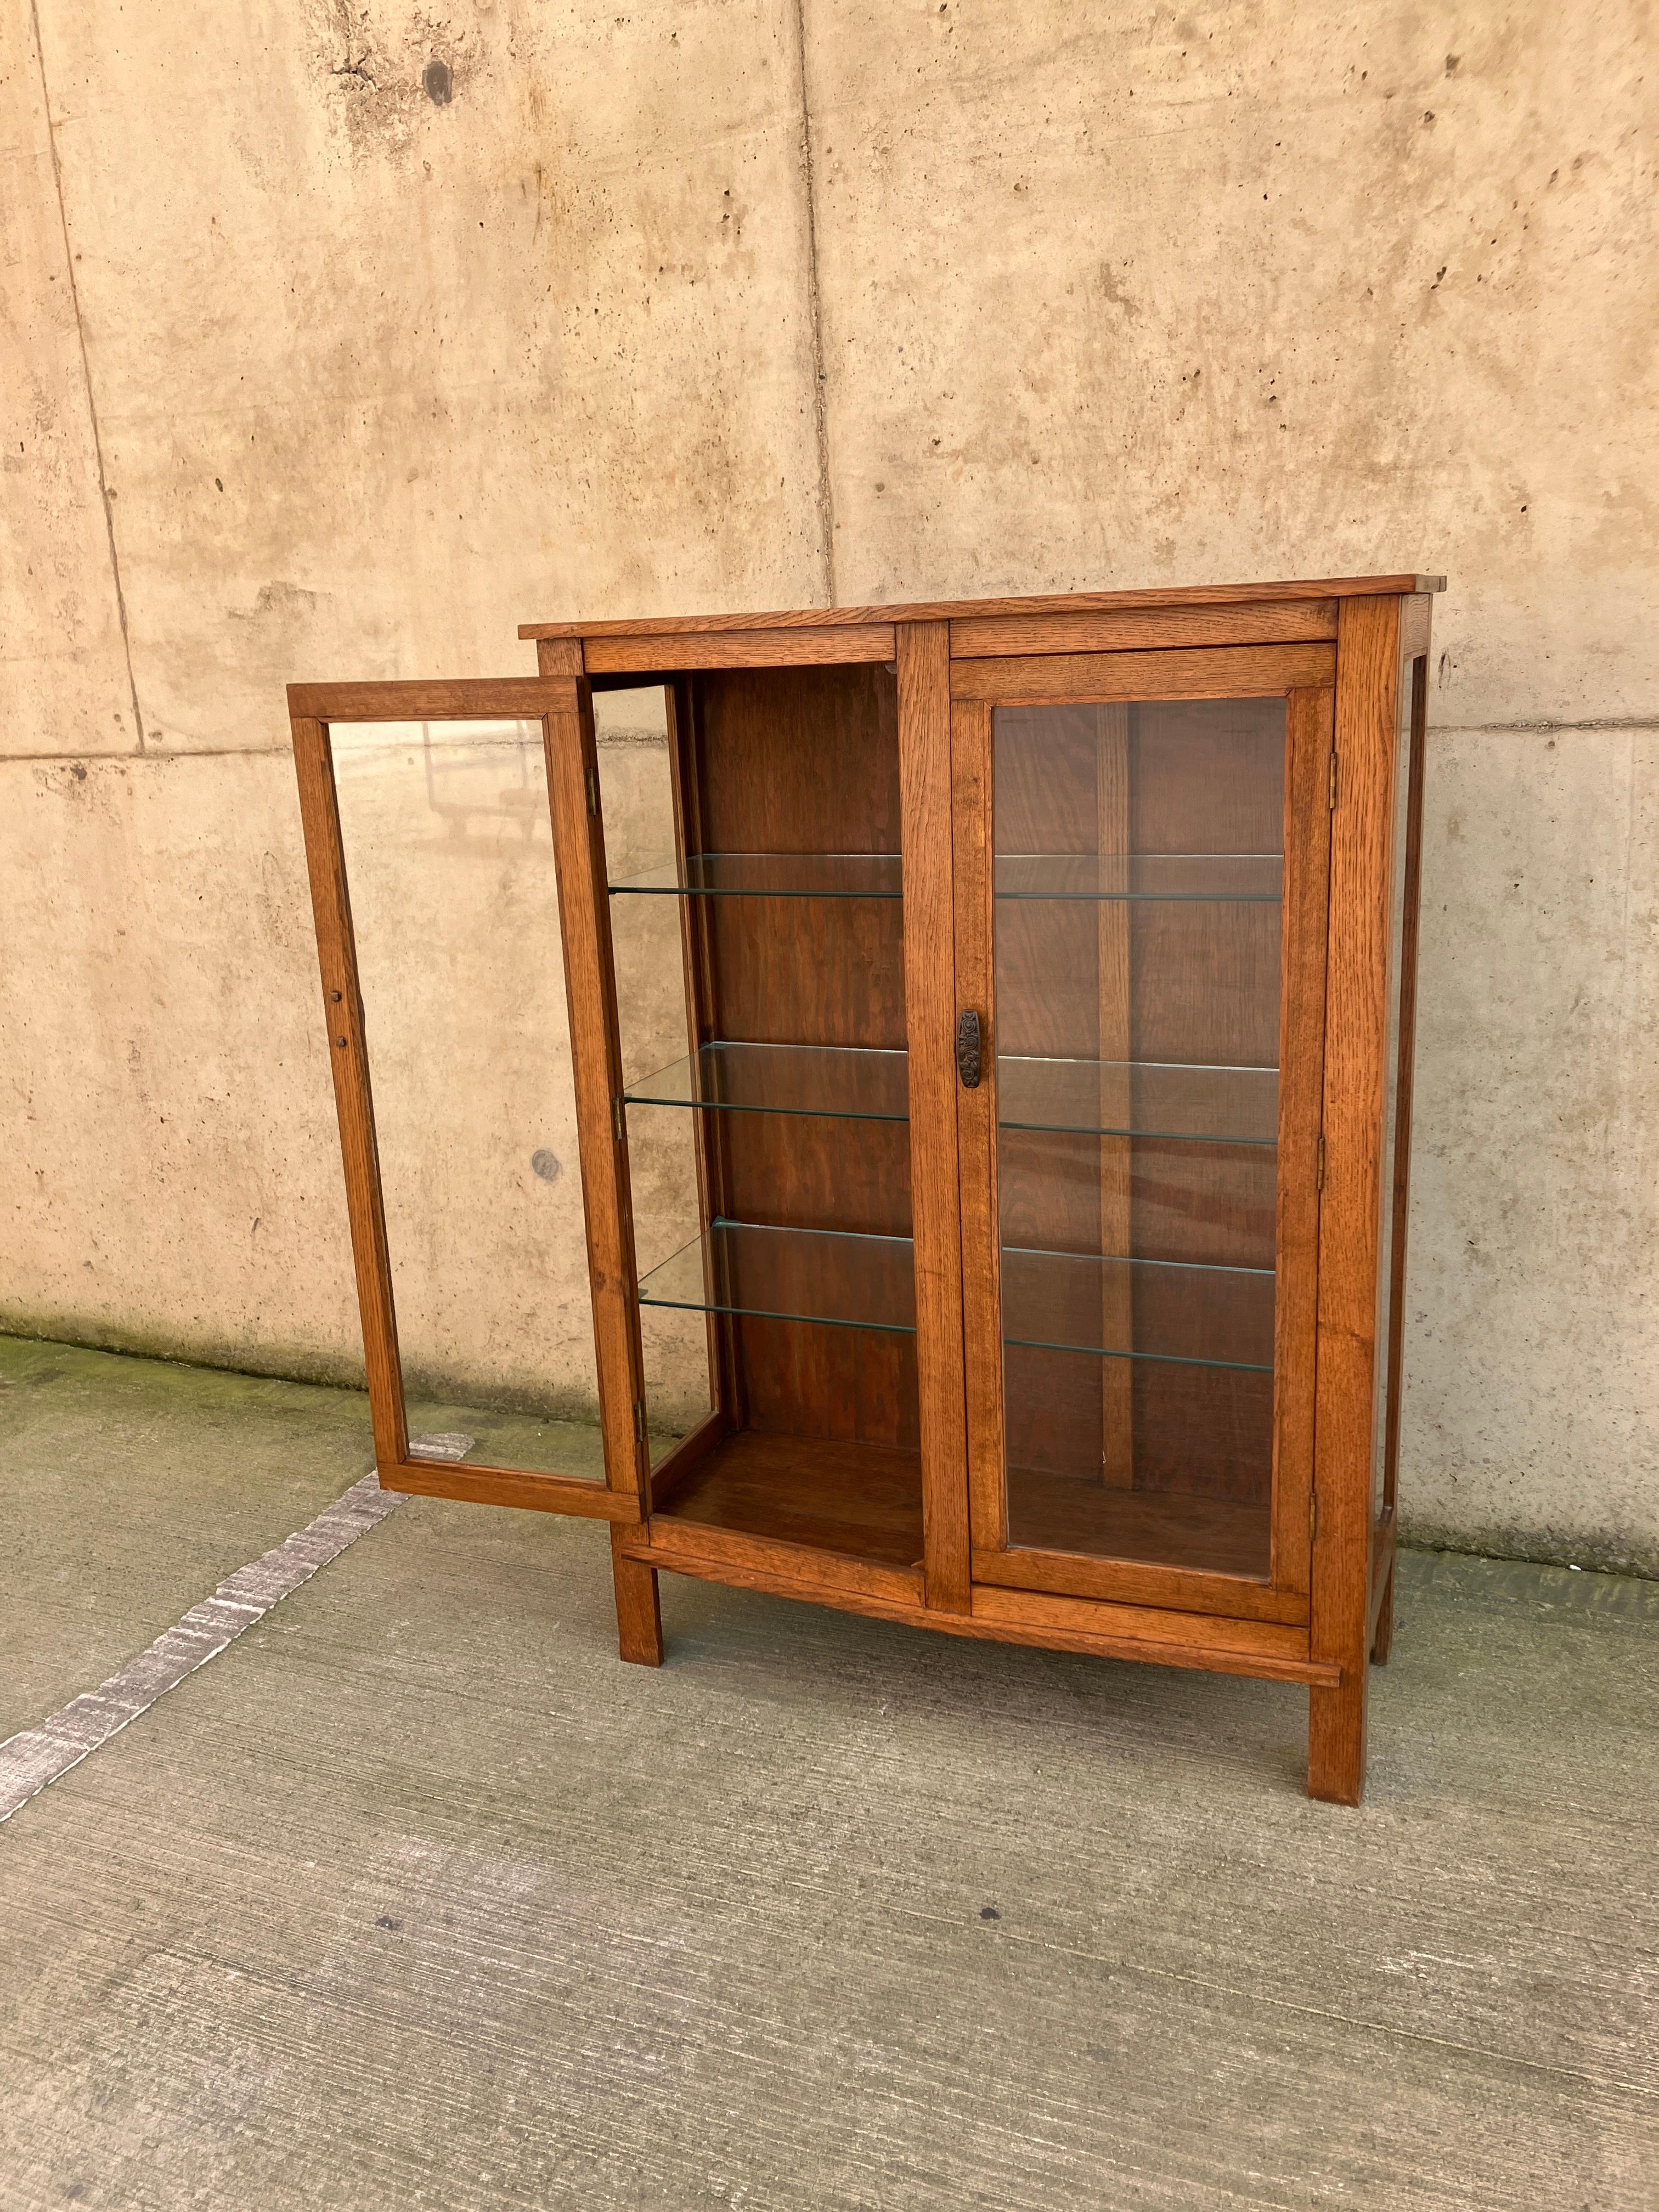 Early 20th Century Art Deco Oak Glazed Display Cabinet with Glass Shelves  For Sale